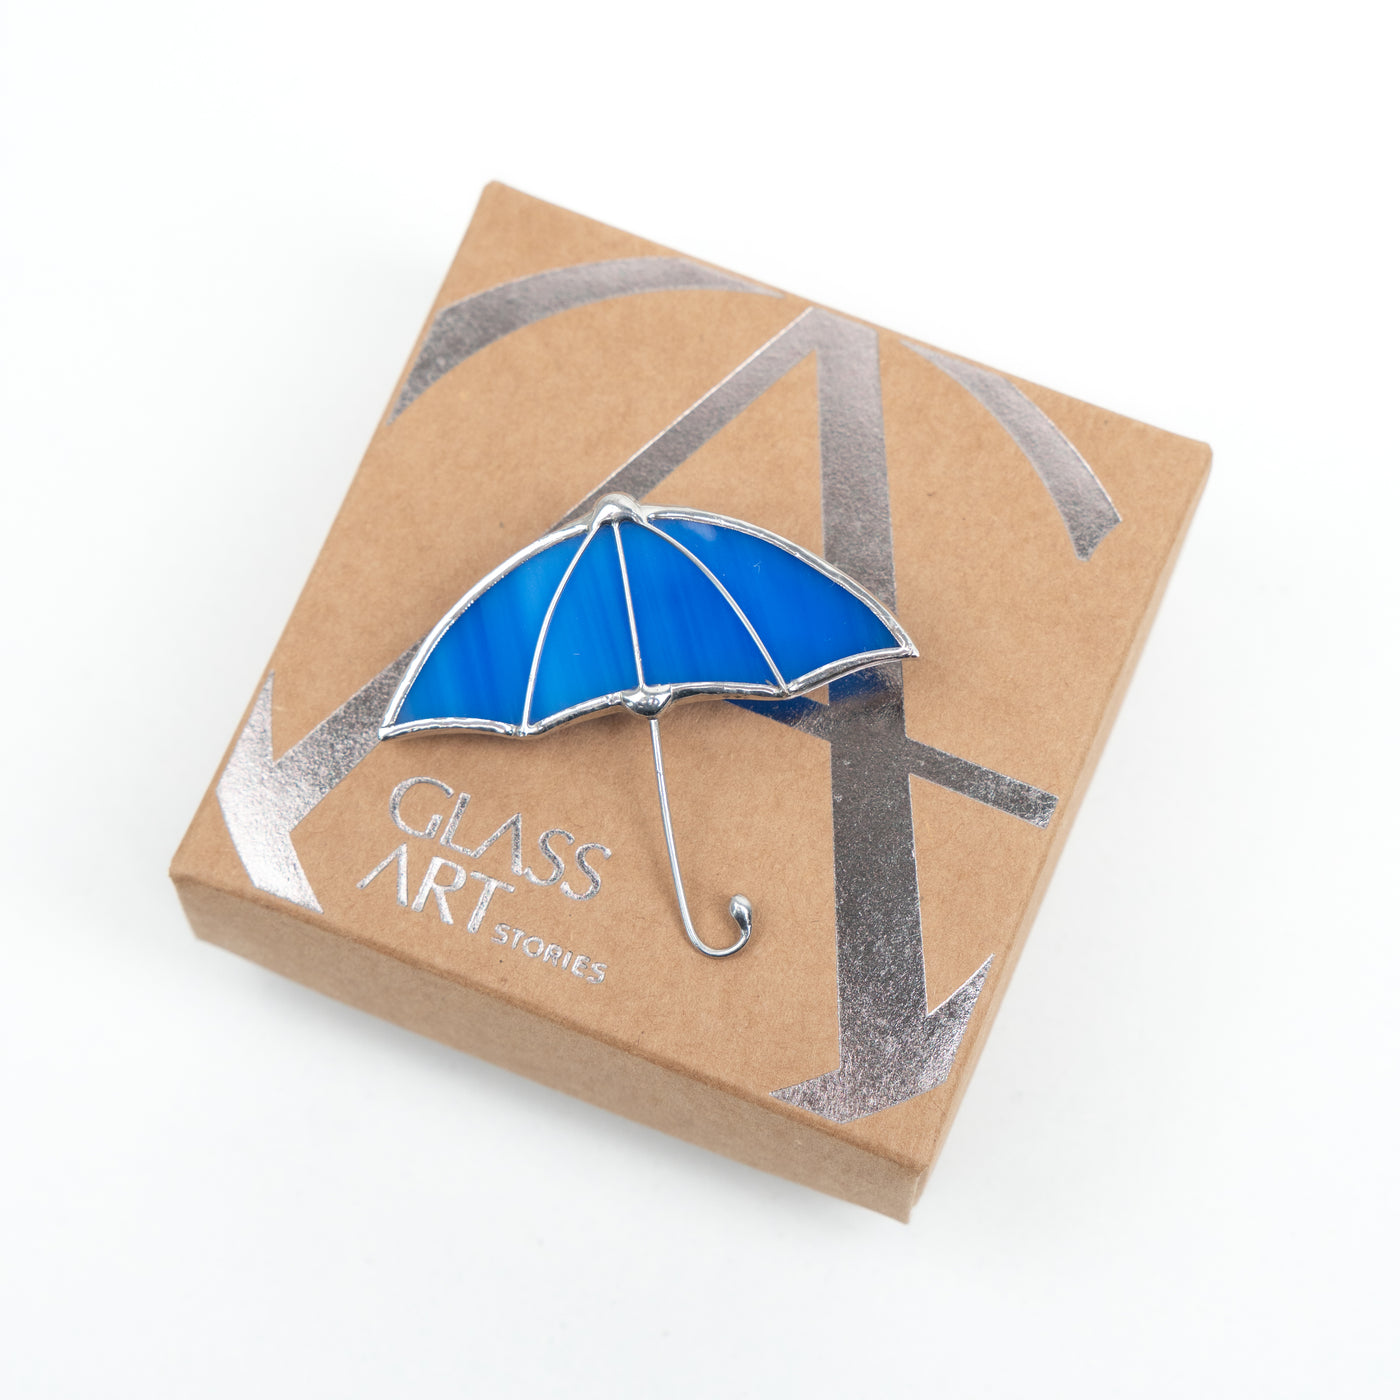 Blue umbrella brooch of stained glass